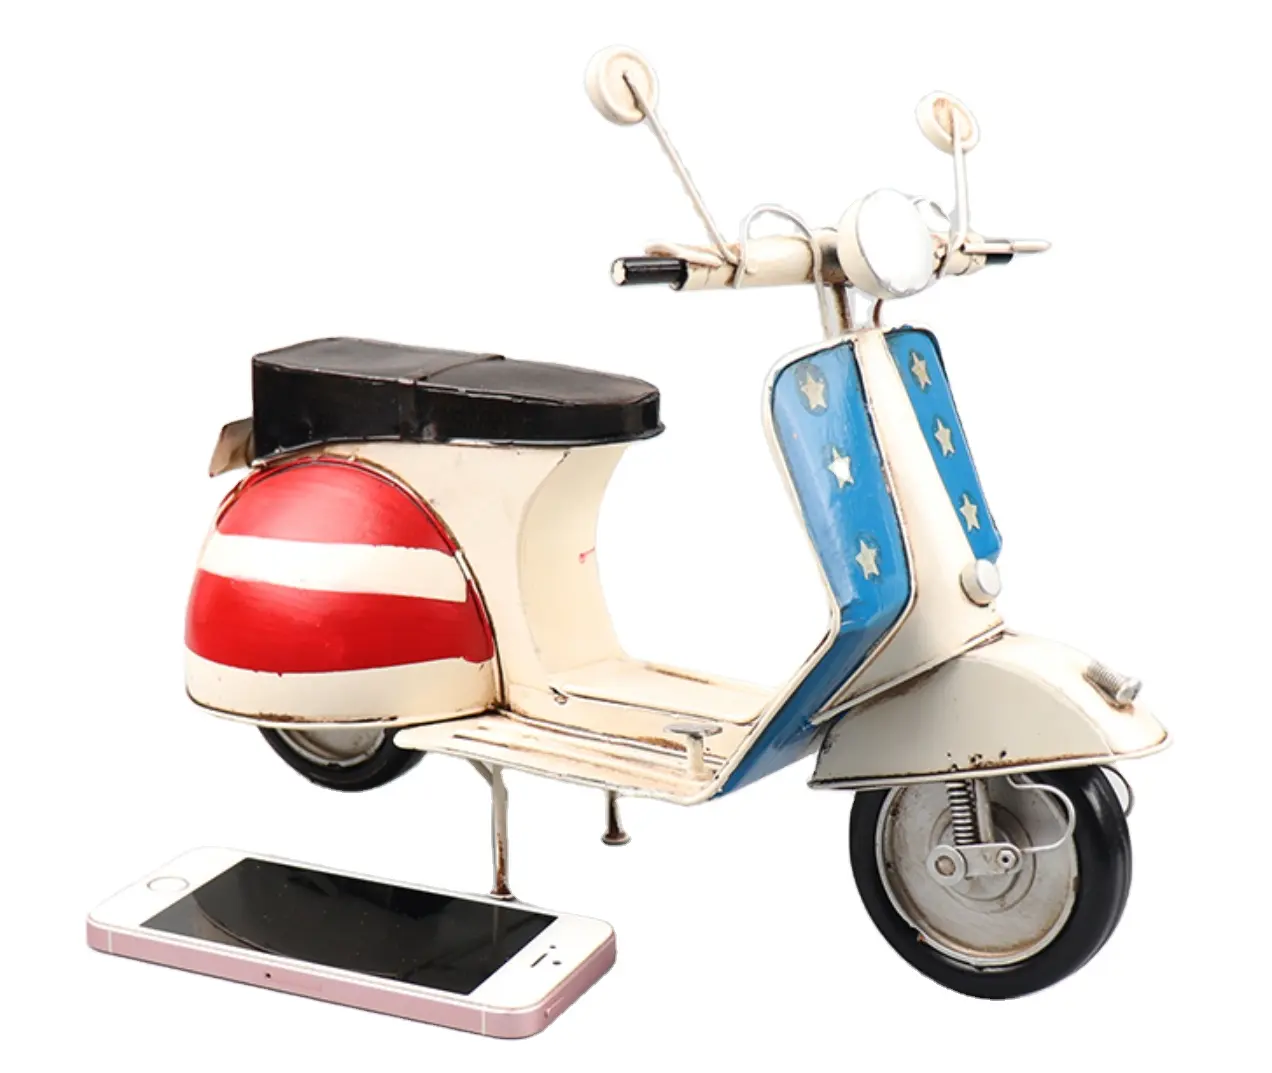 Hot Sell Classic Scooter Model Toy Vehicles Antique Home Office Decor Mini Vintage Handmade Craft Metal Model Motorcycle